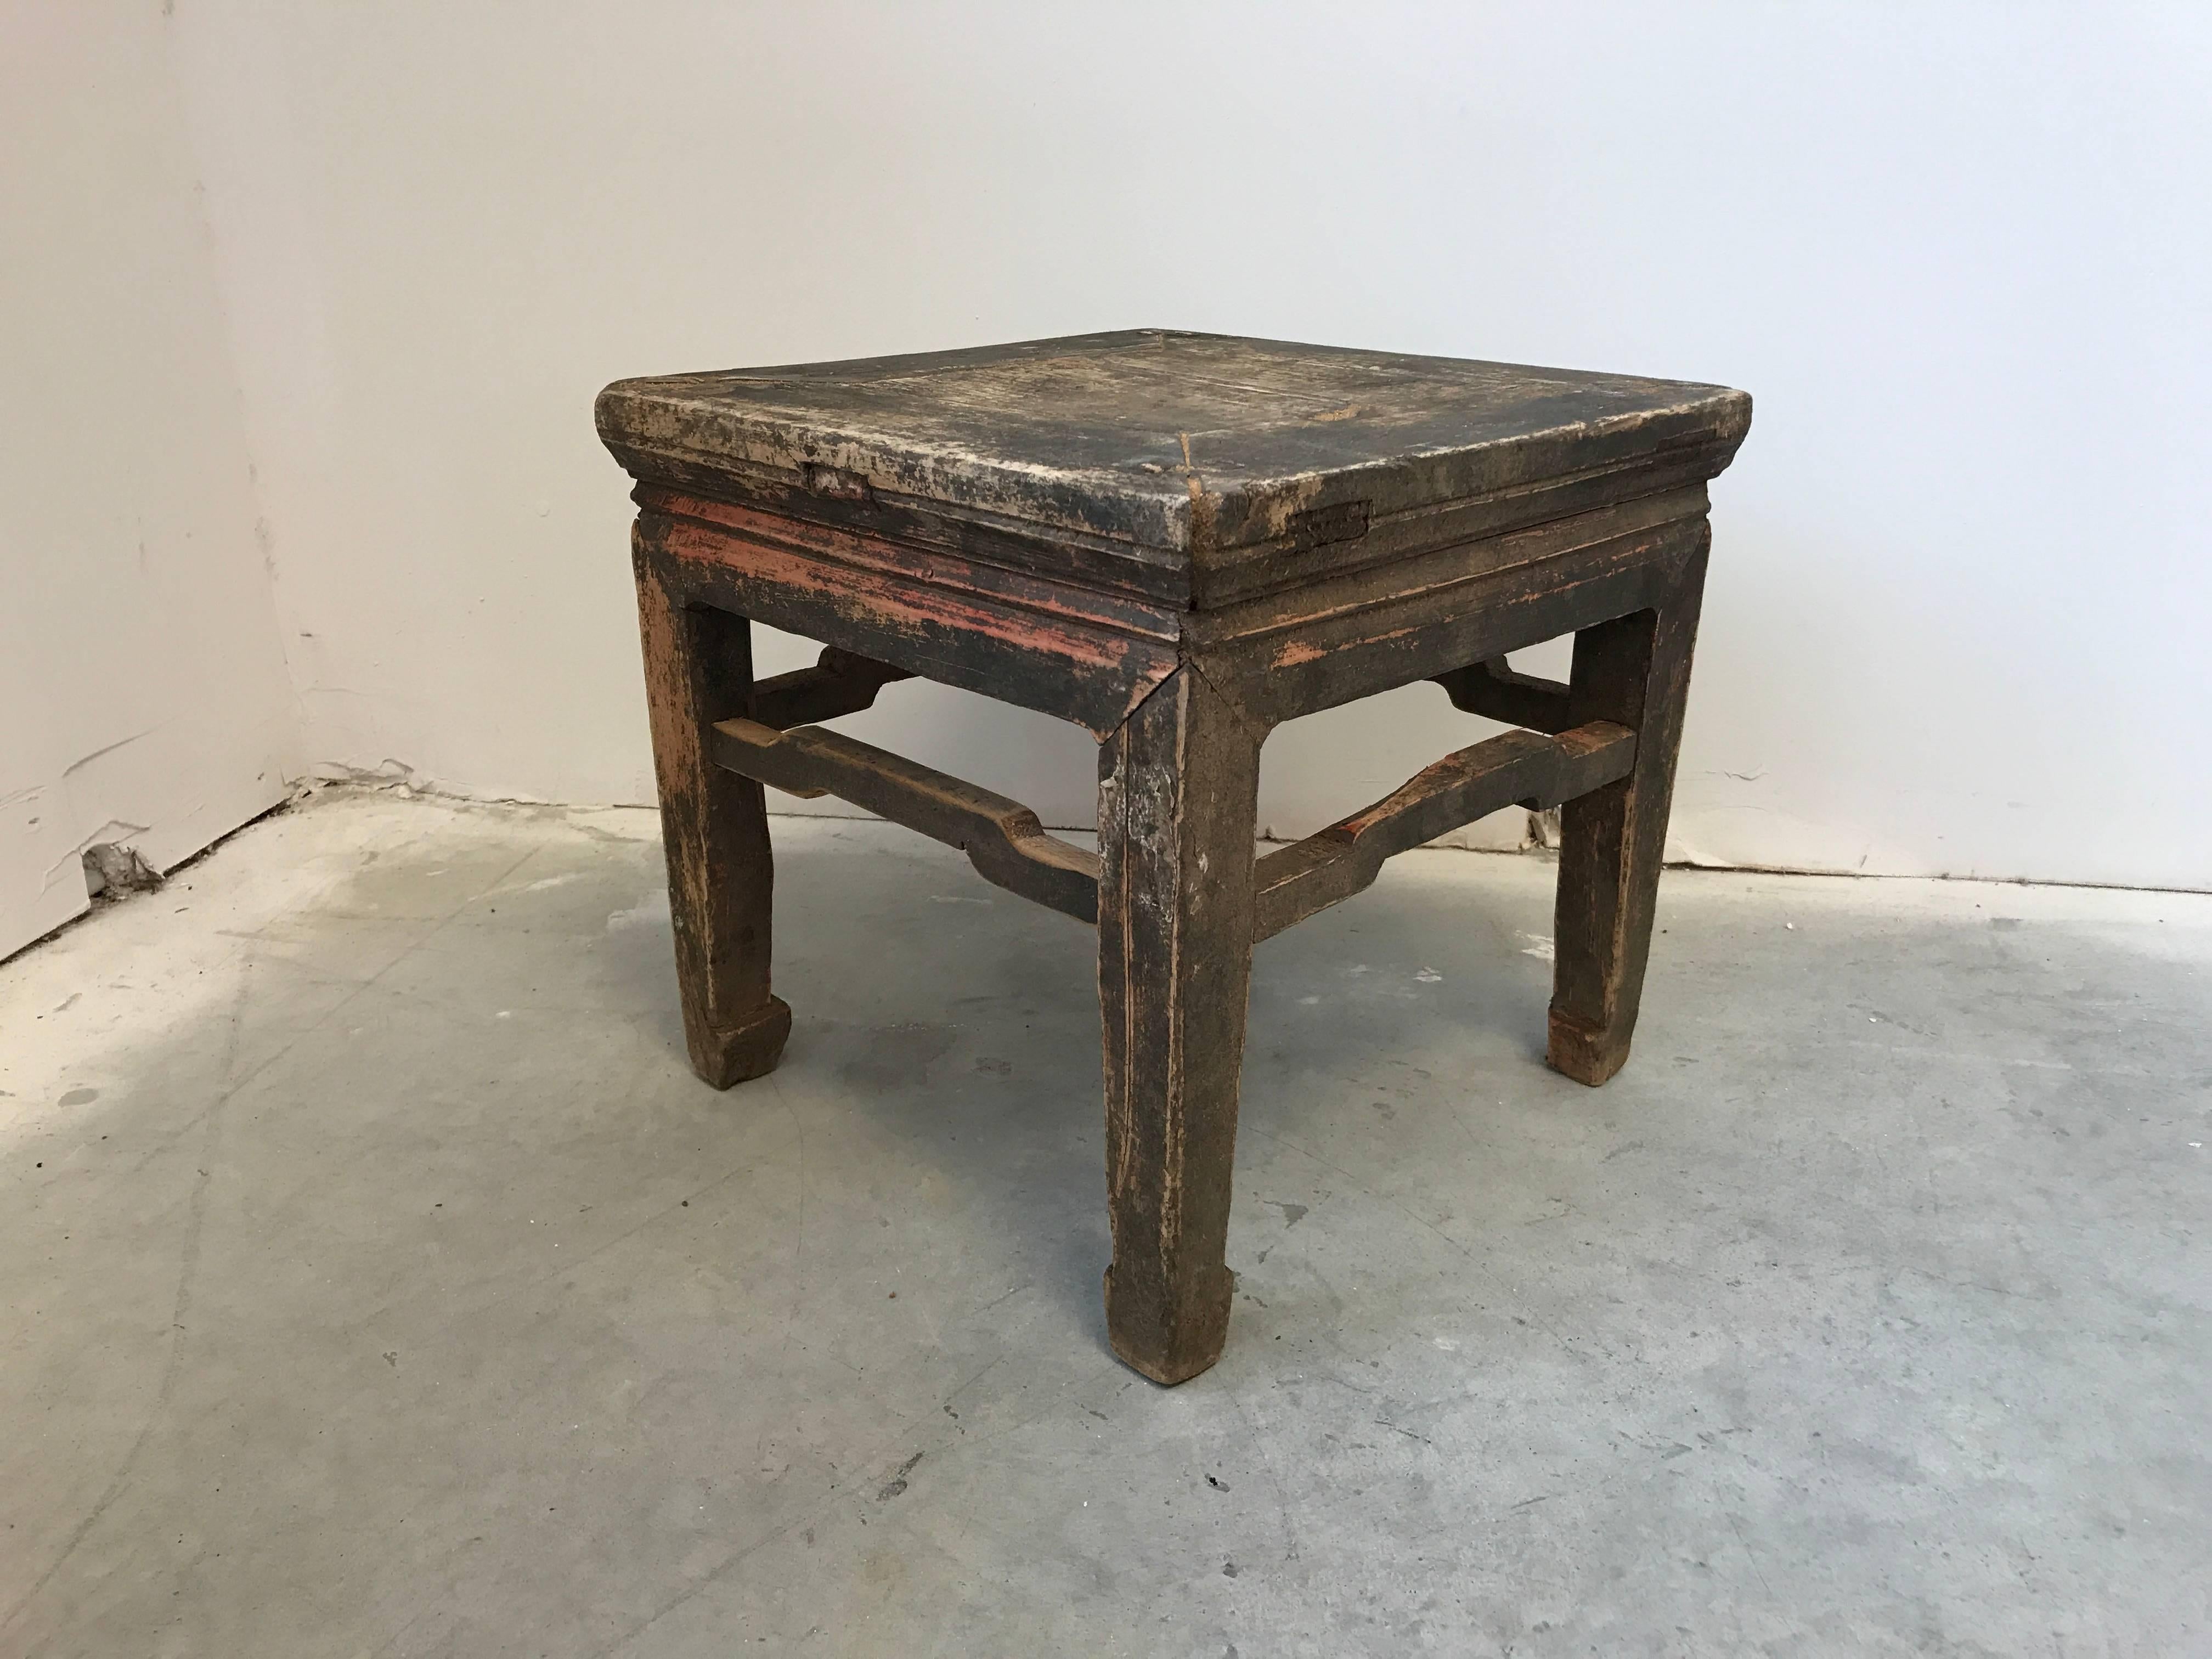 Offered is a beautiful, 19th century Asian elmwood stool/side table.